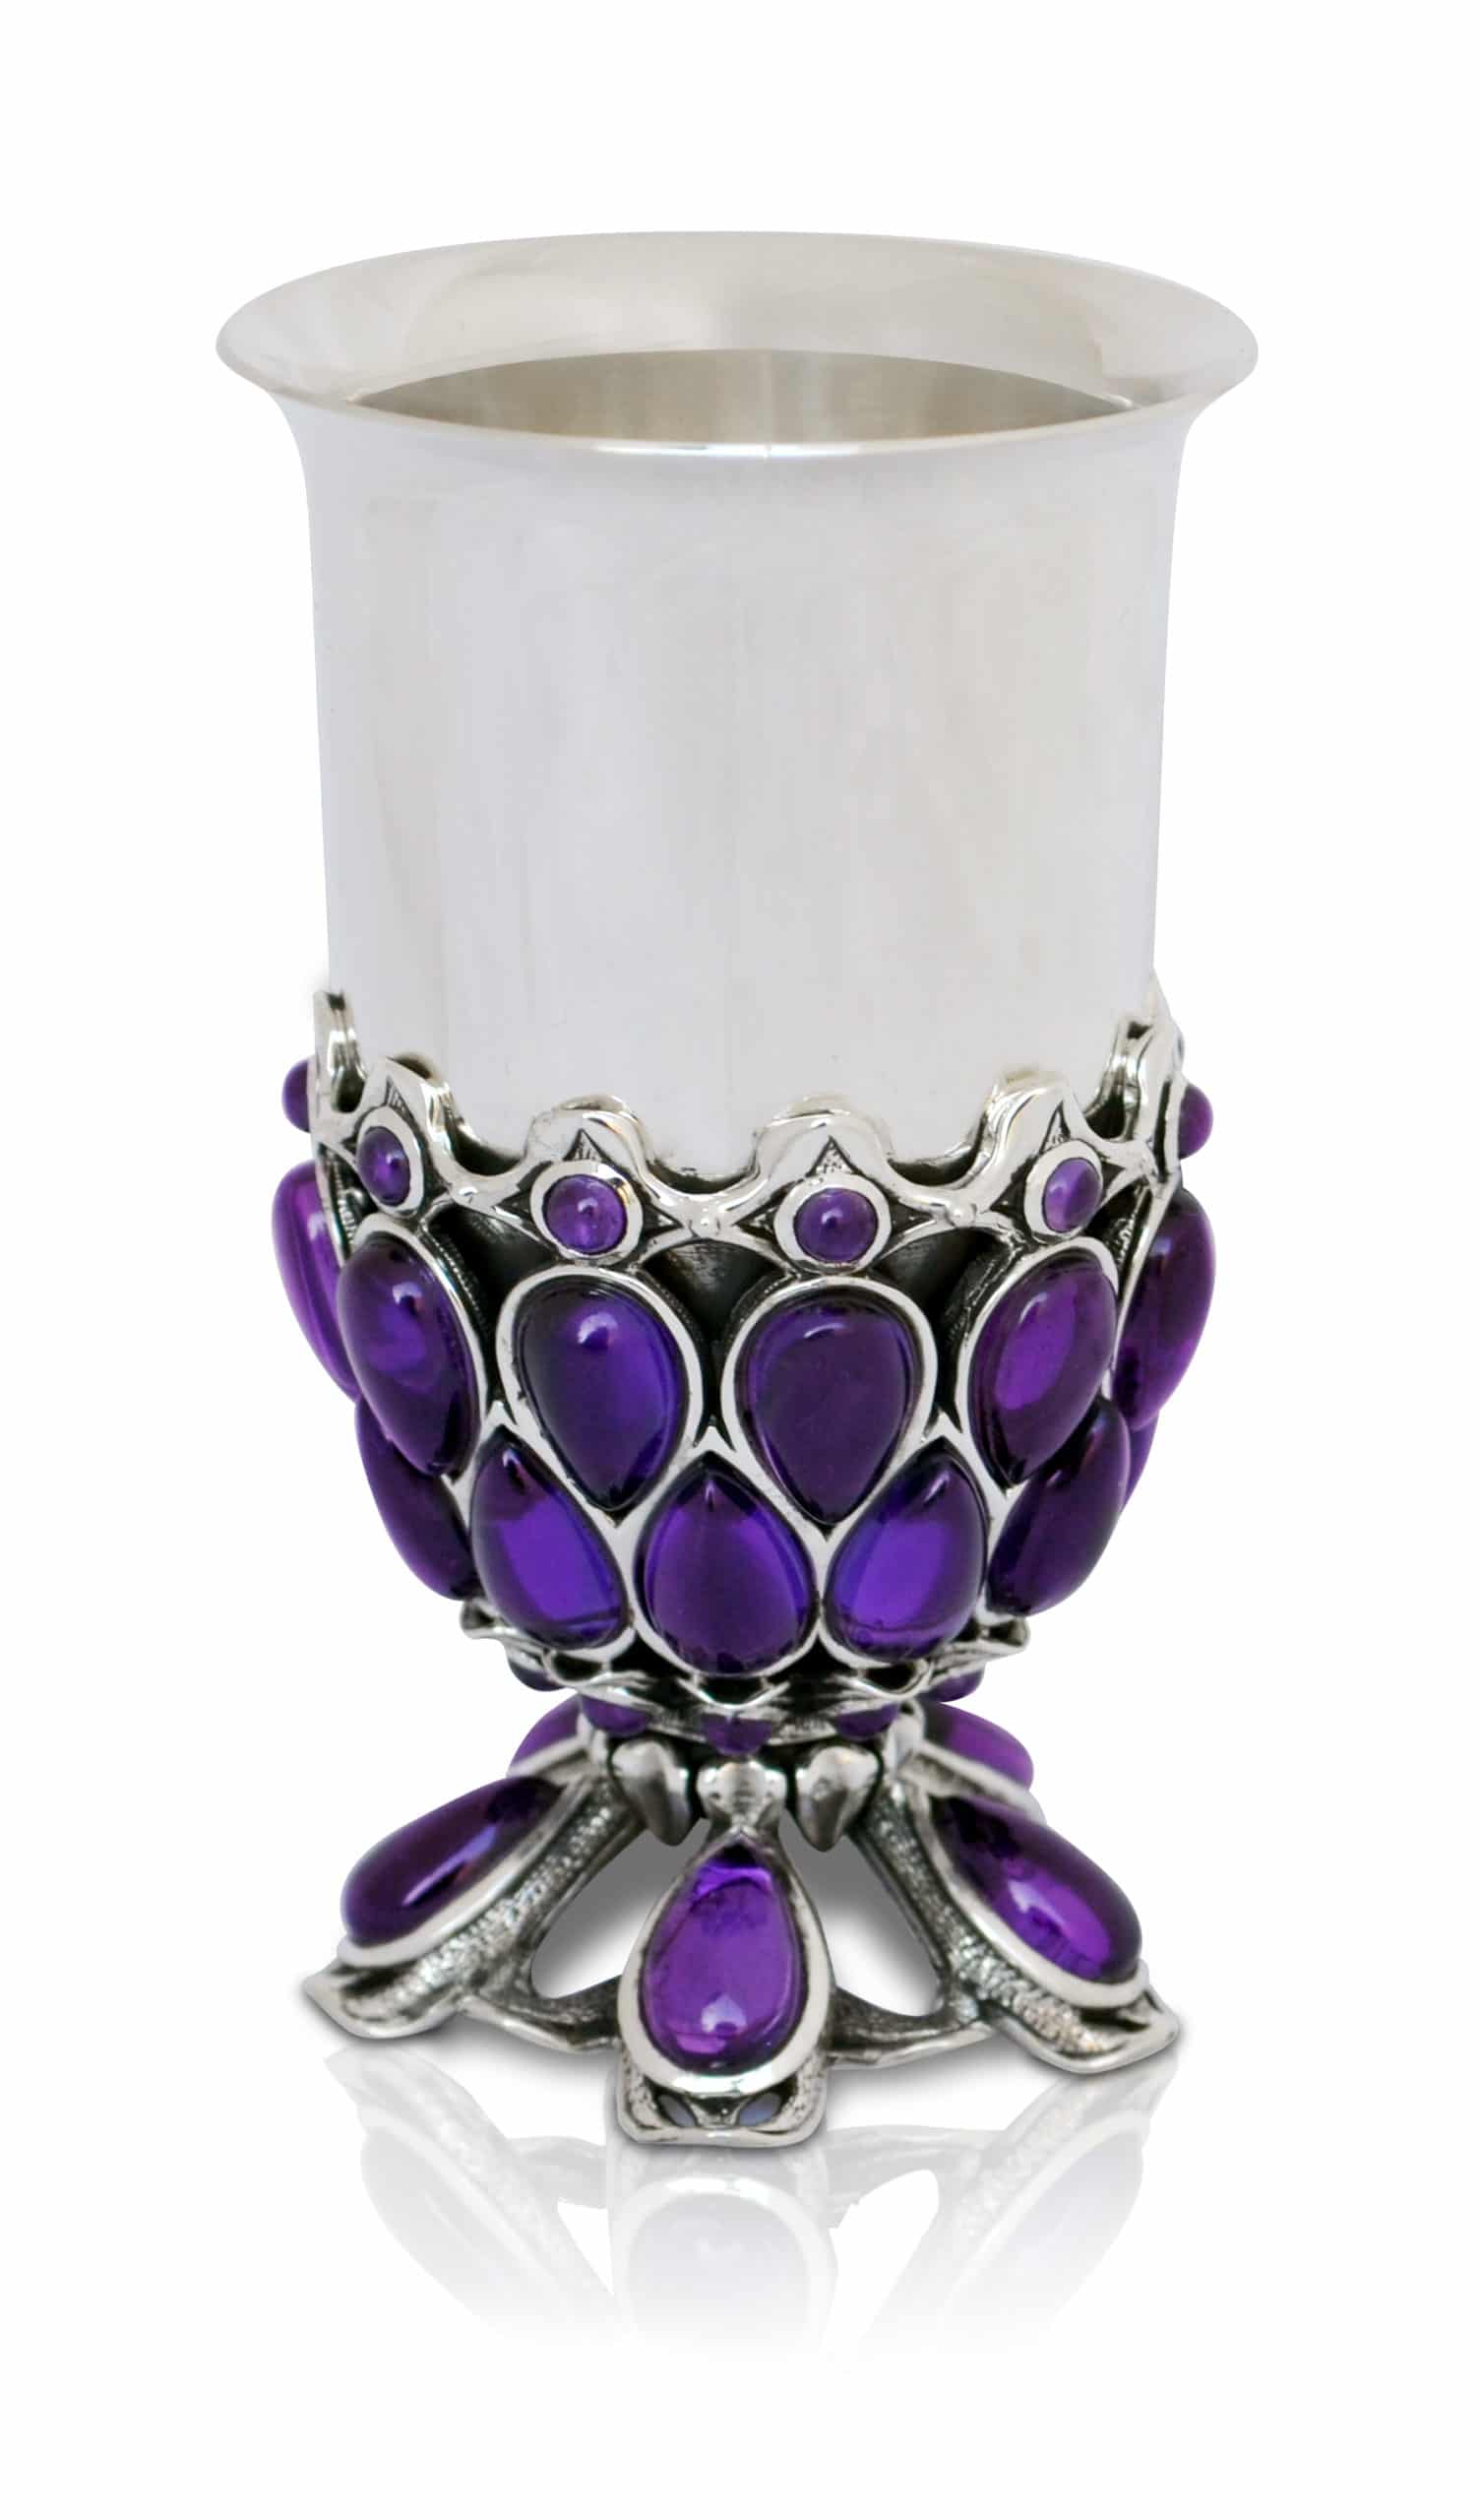 Unique Wine Cup with Natural Amethyst Stones